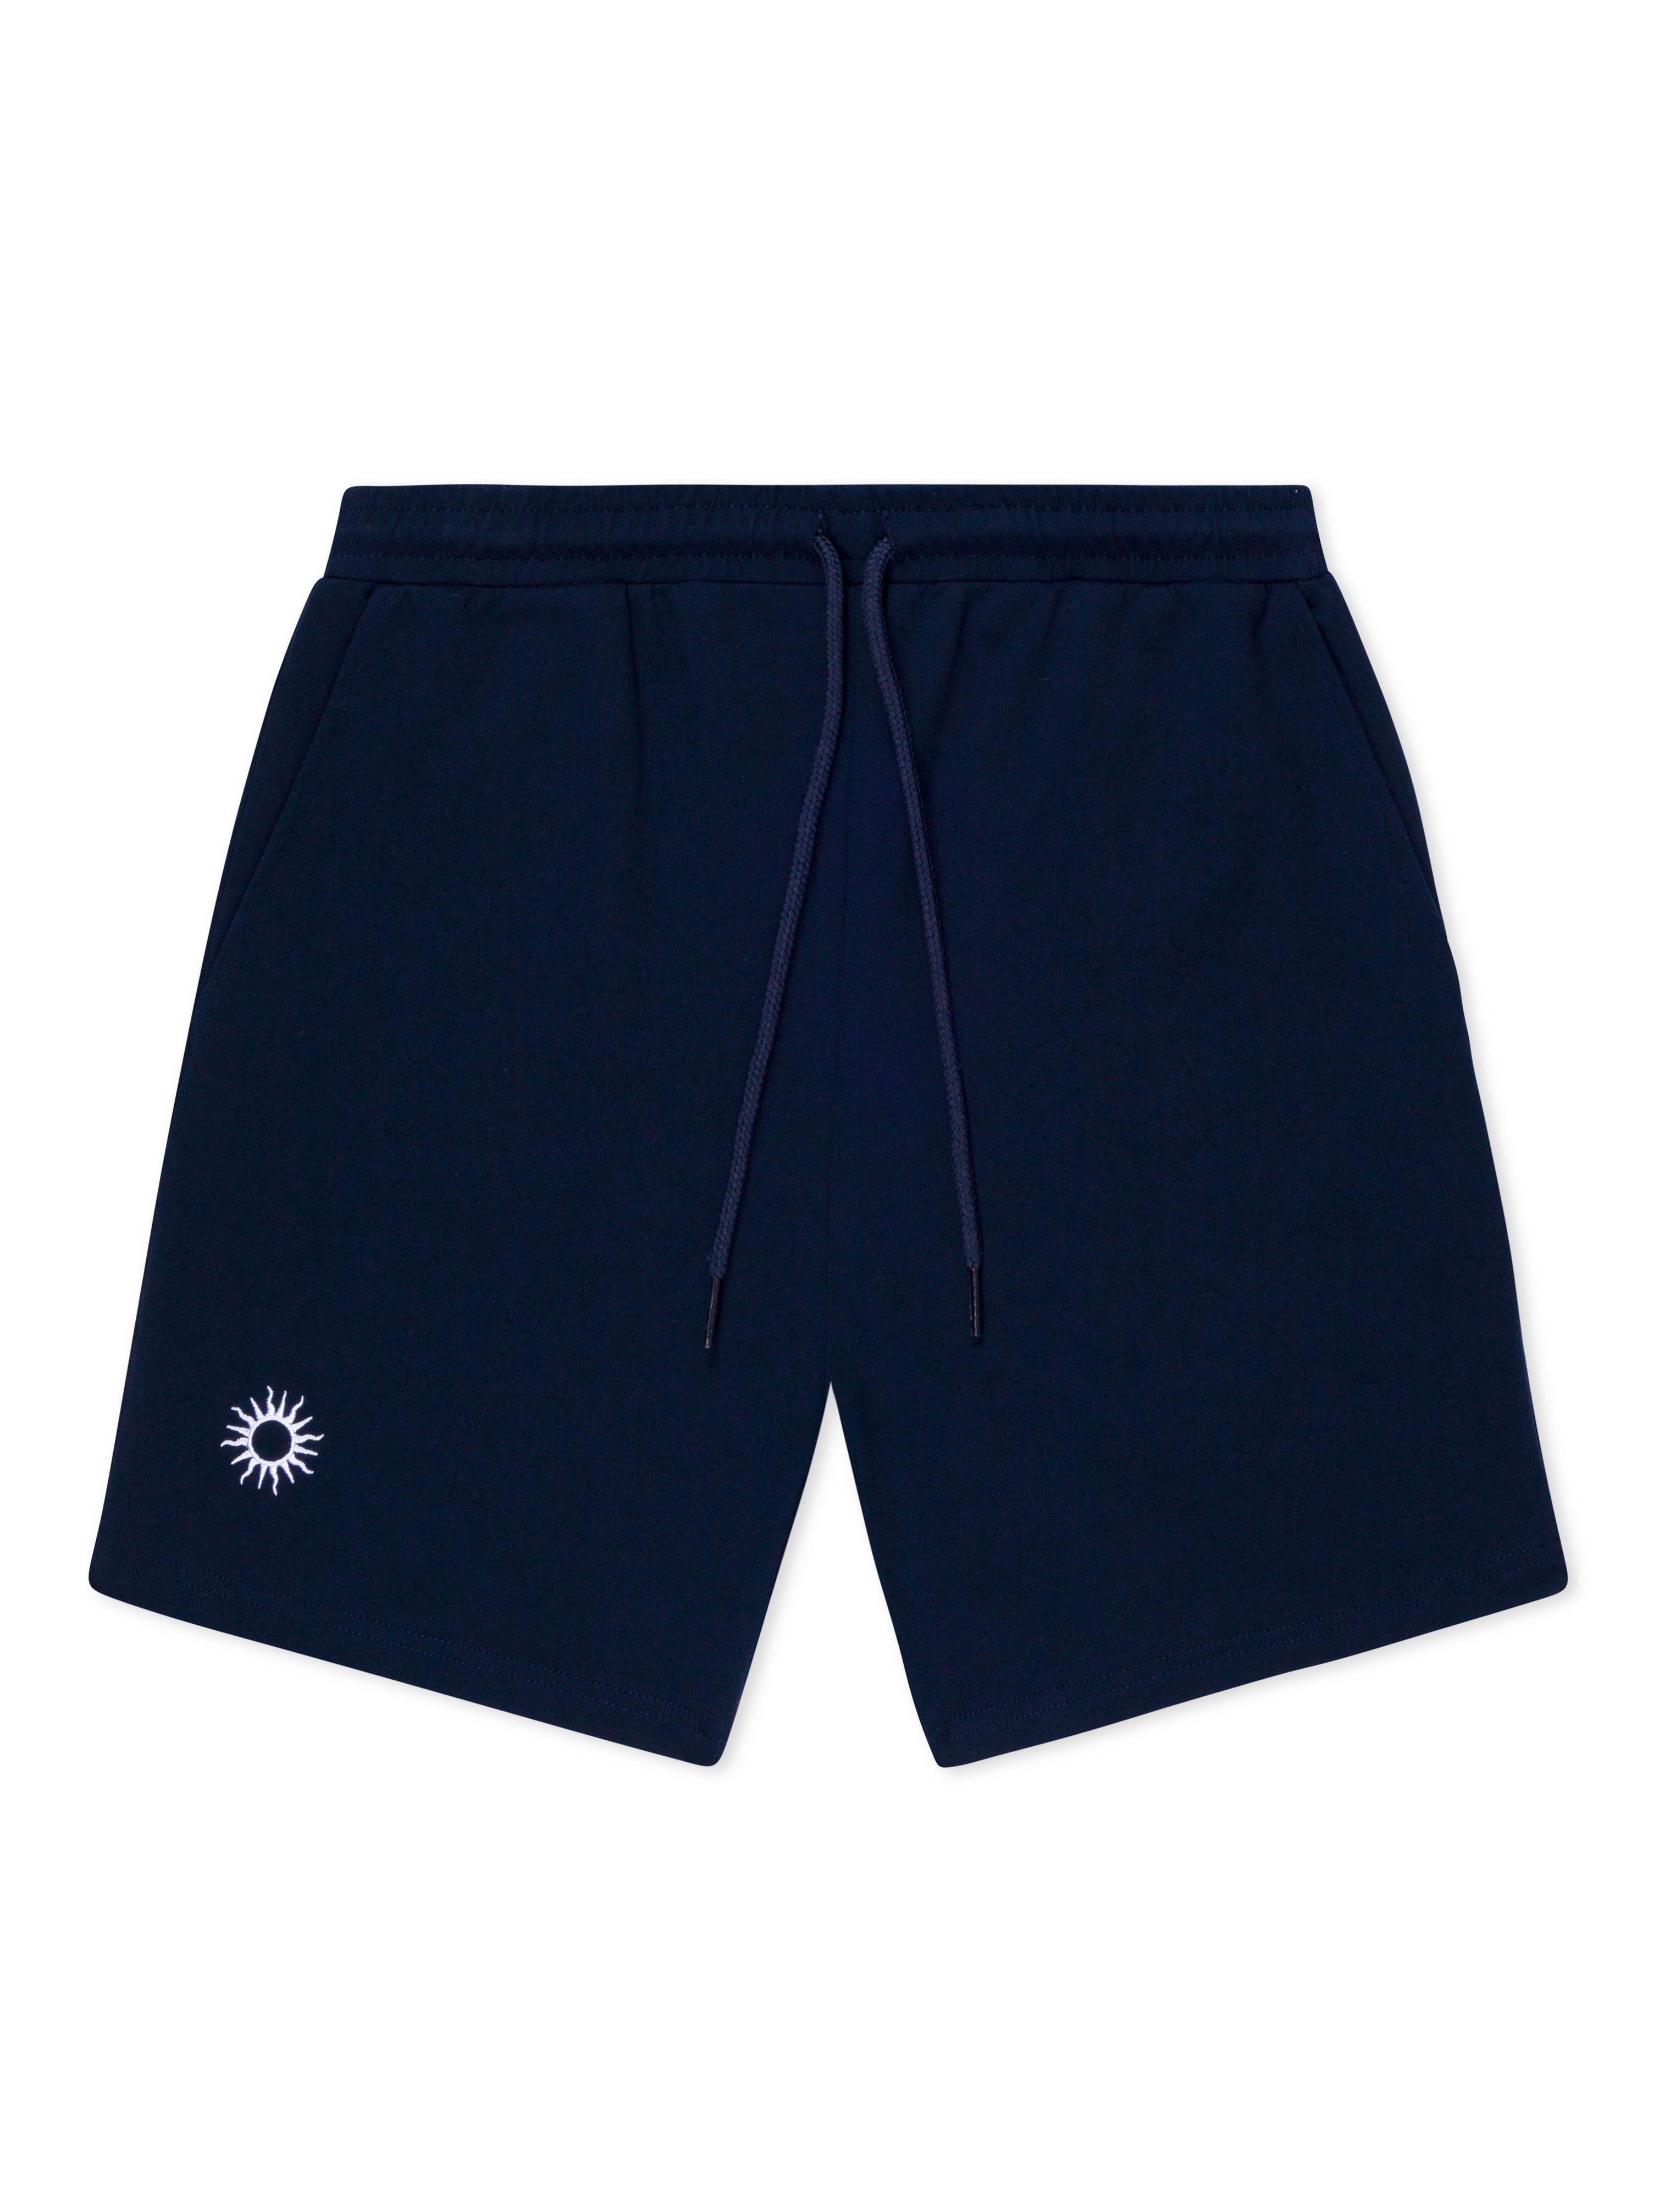 navy cotton gym shorts for men with pockets by sol apparel